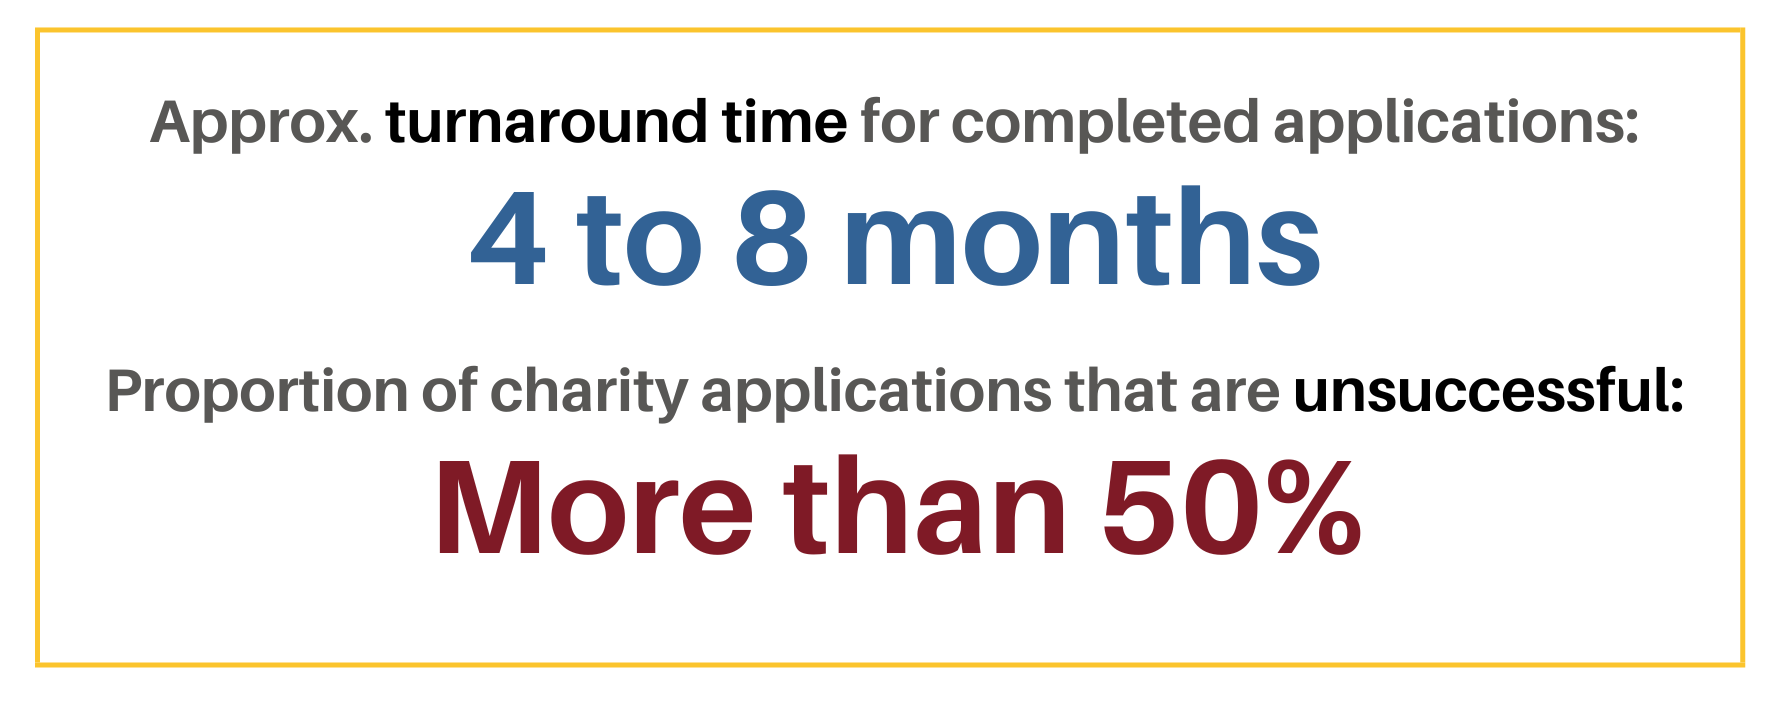 Cost of setting up a registered charity from scratch: $5,000 to $15,000. Approximate turnaround time for completed applications: 4 to 8 months. Proportion of charity applications that are unsuccessful: more than 50%.